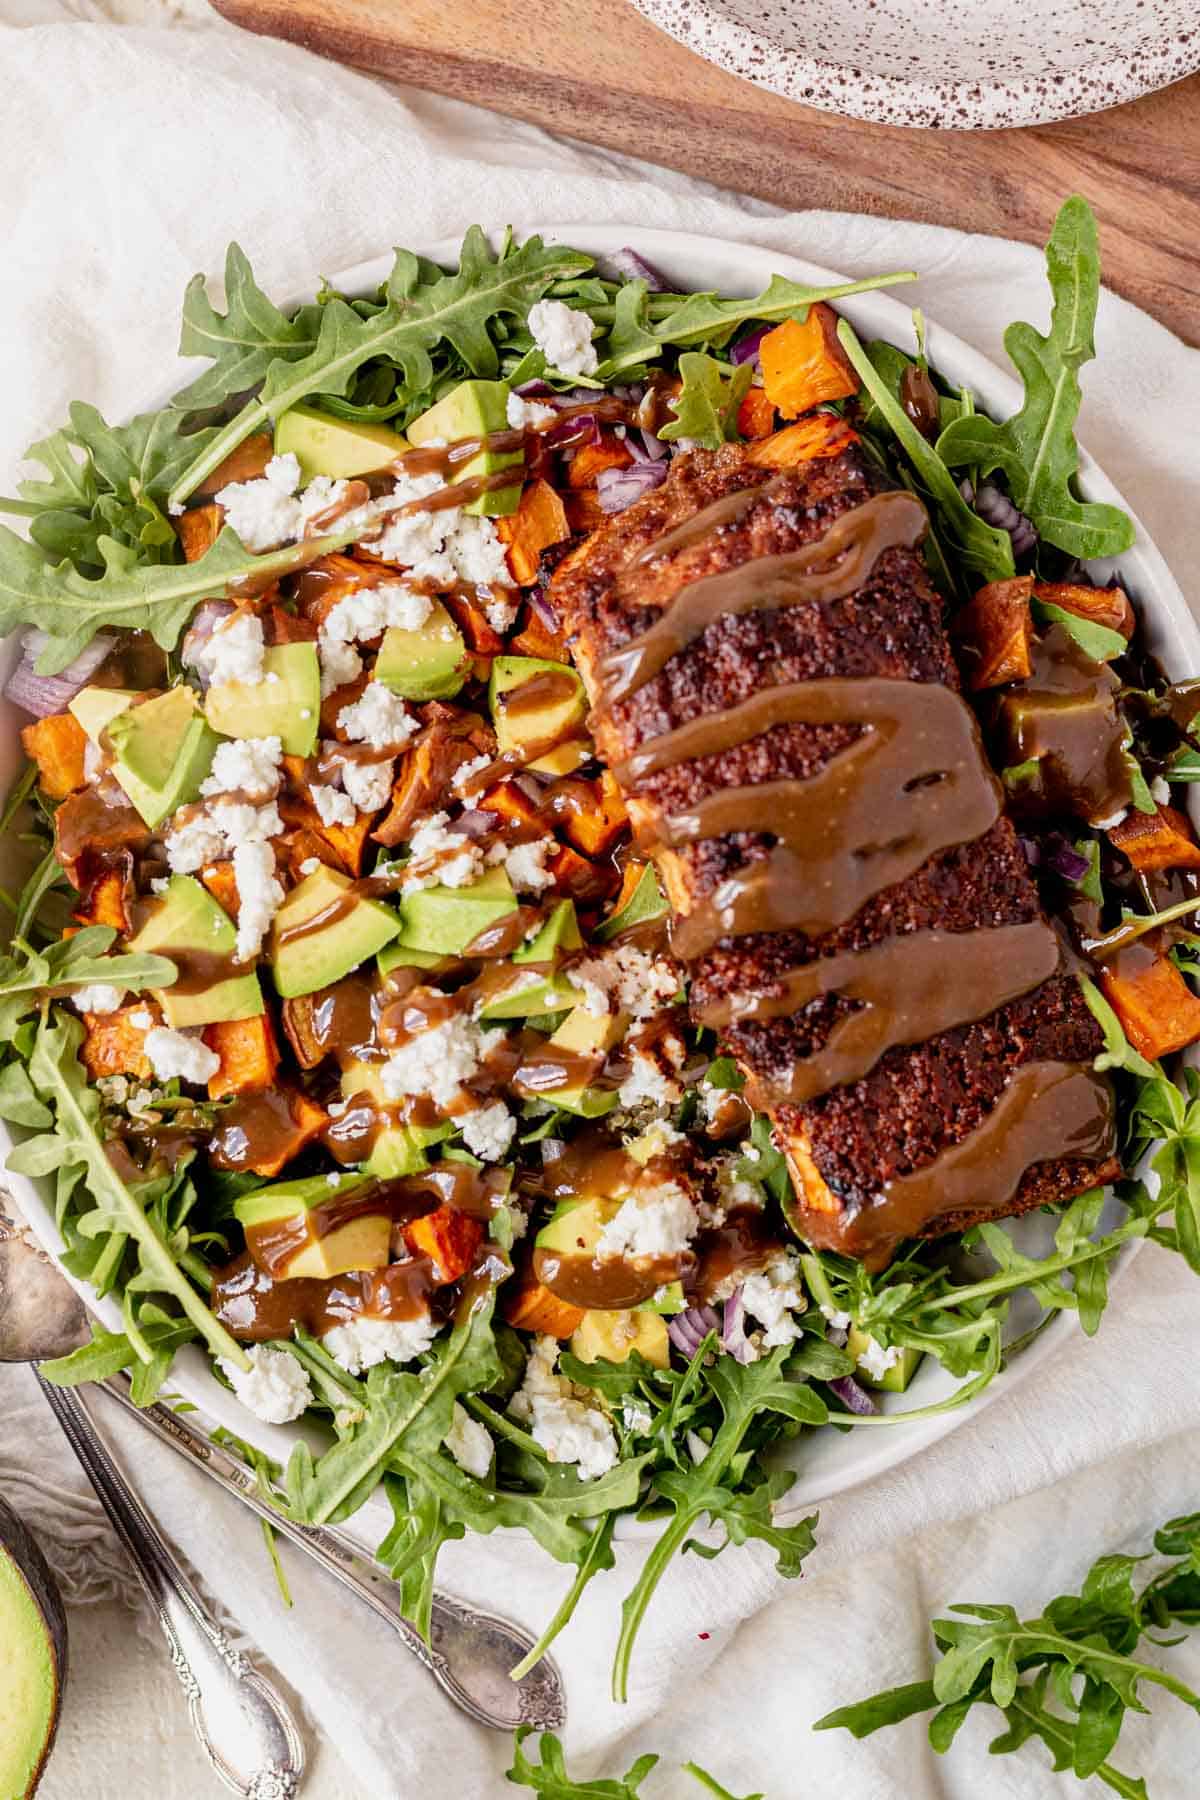 salmon arugula salad with avocado, goat cheese and balsamic dressing